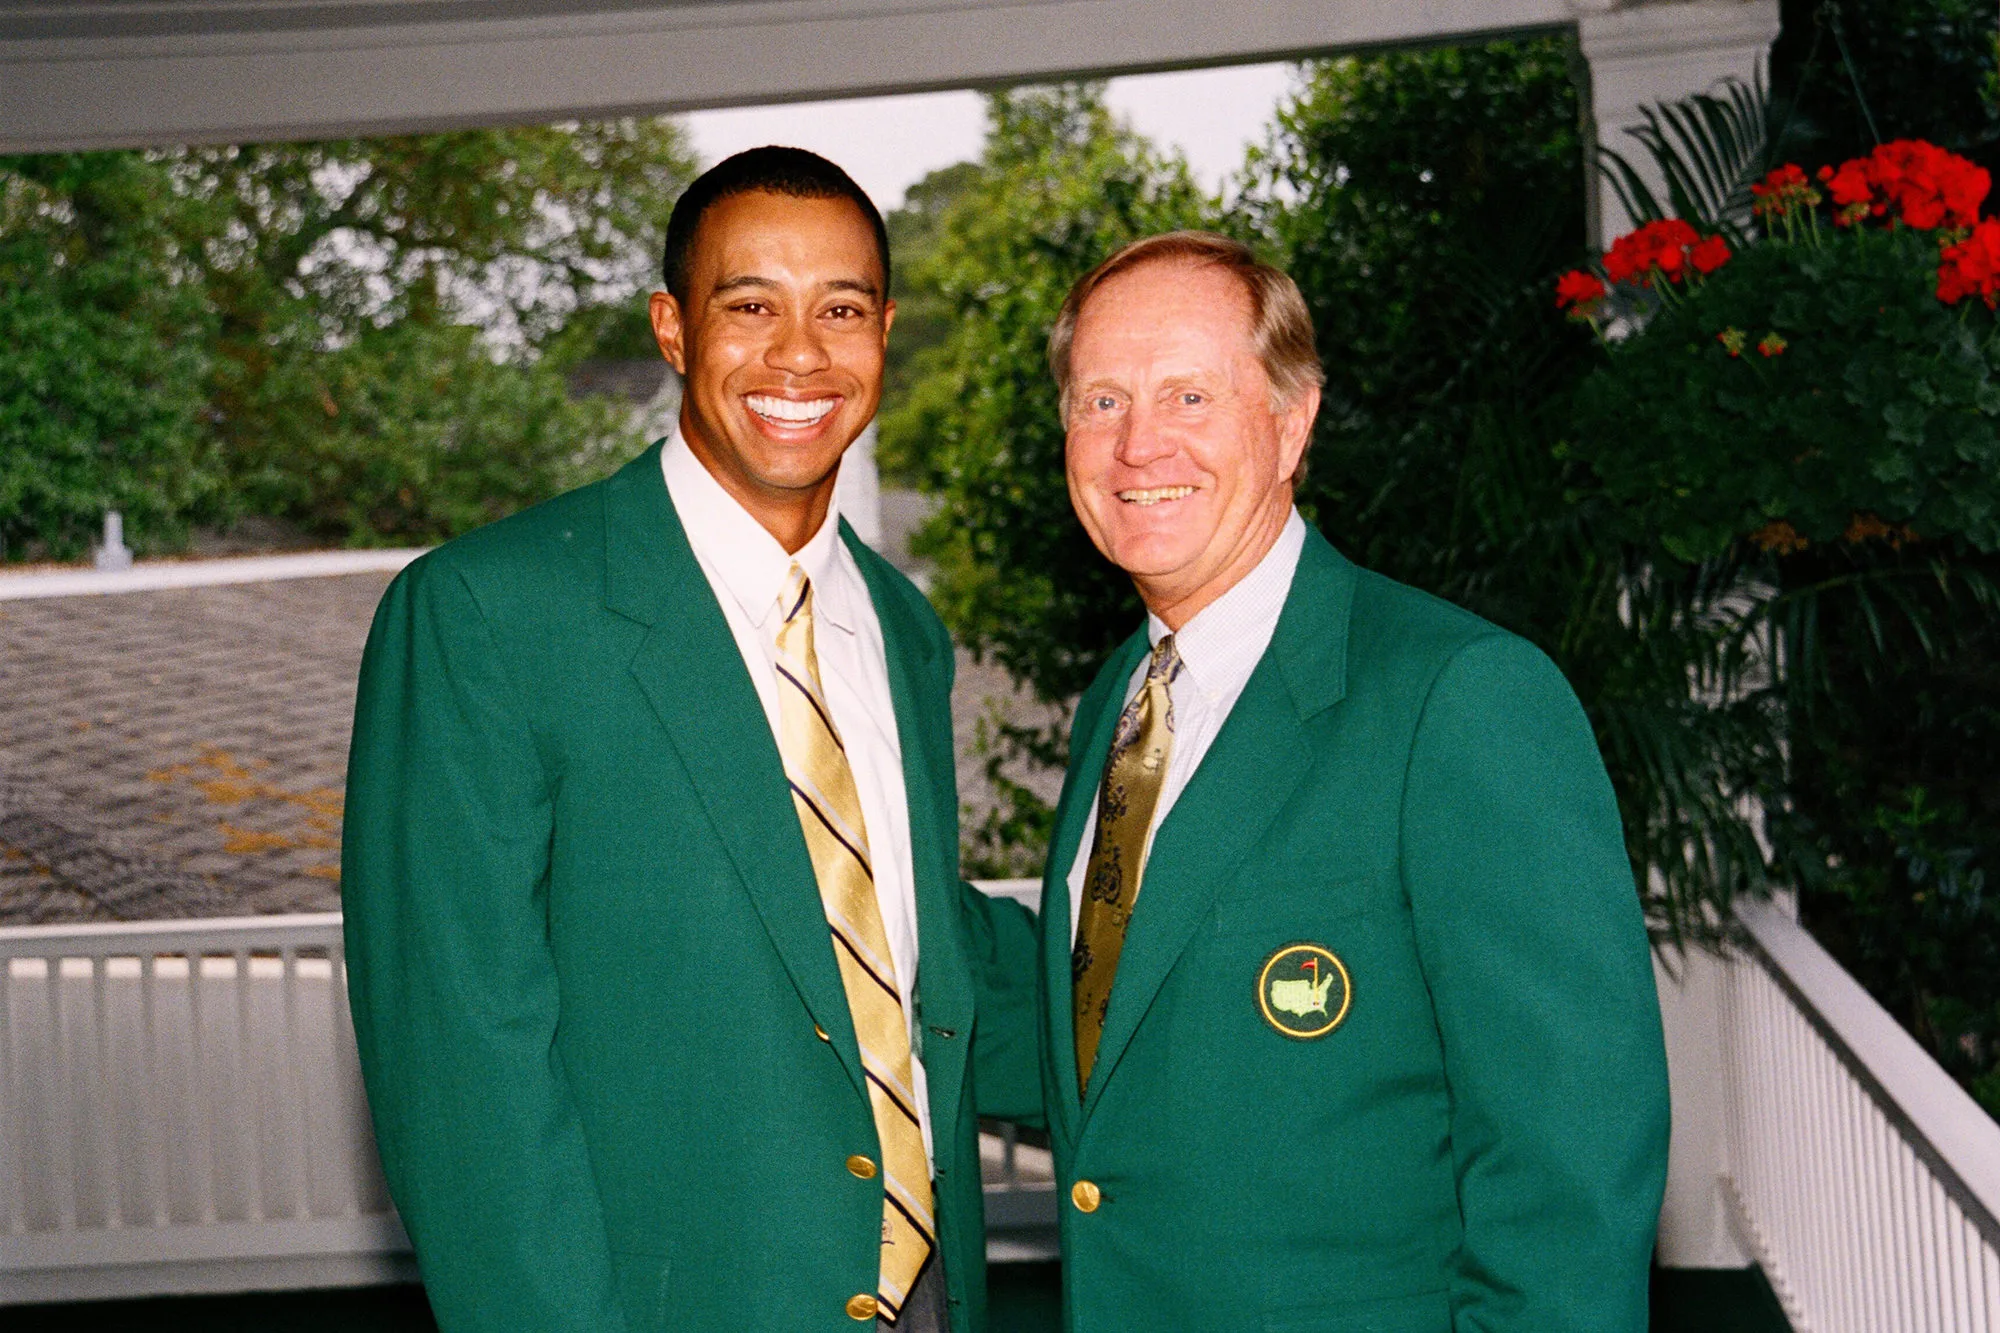 Behind the scenes at the Masters Champions Dinner